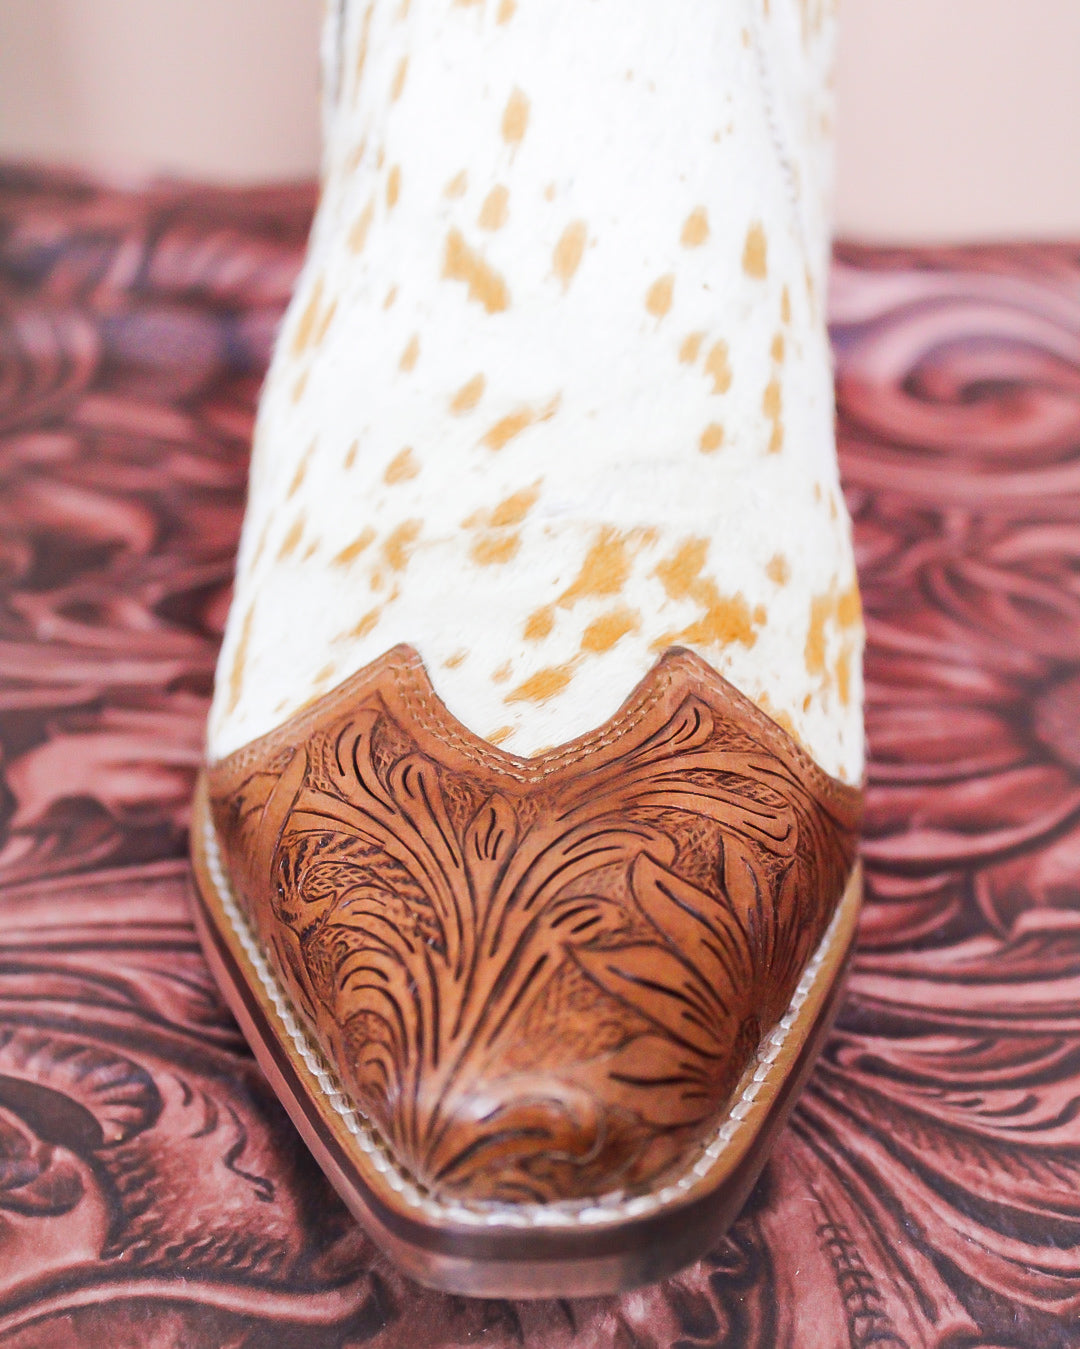 Westro Tooled Leather Booties - Imperfectly Perfect Boutique